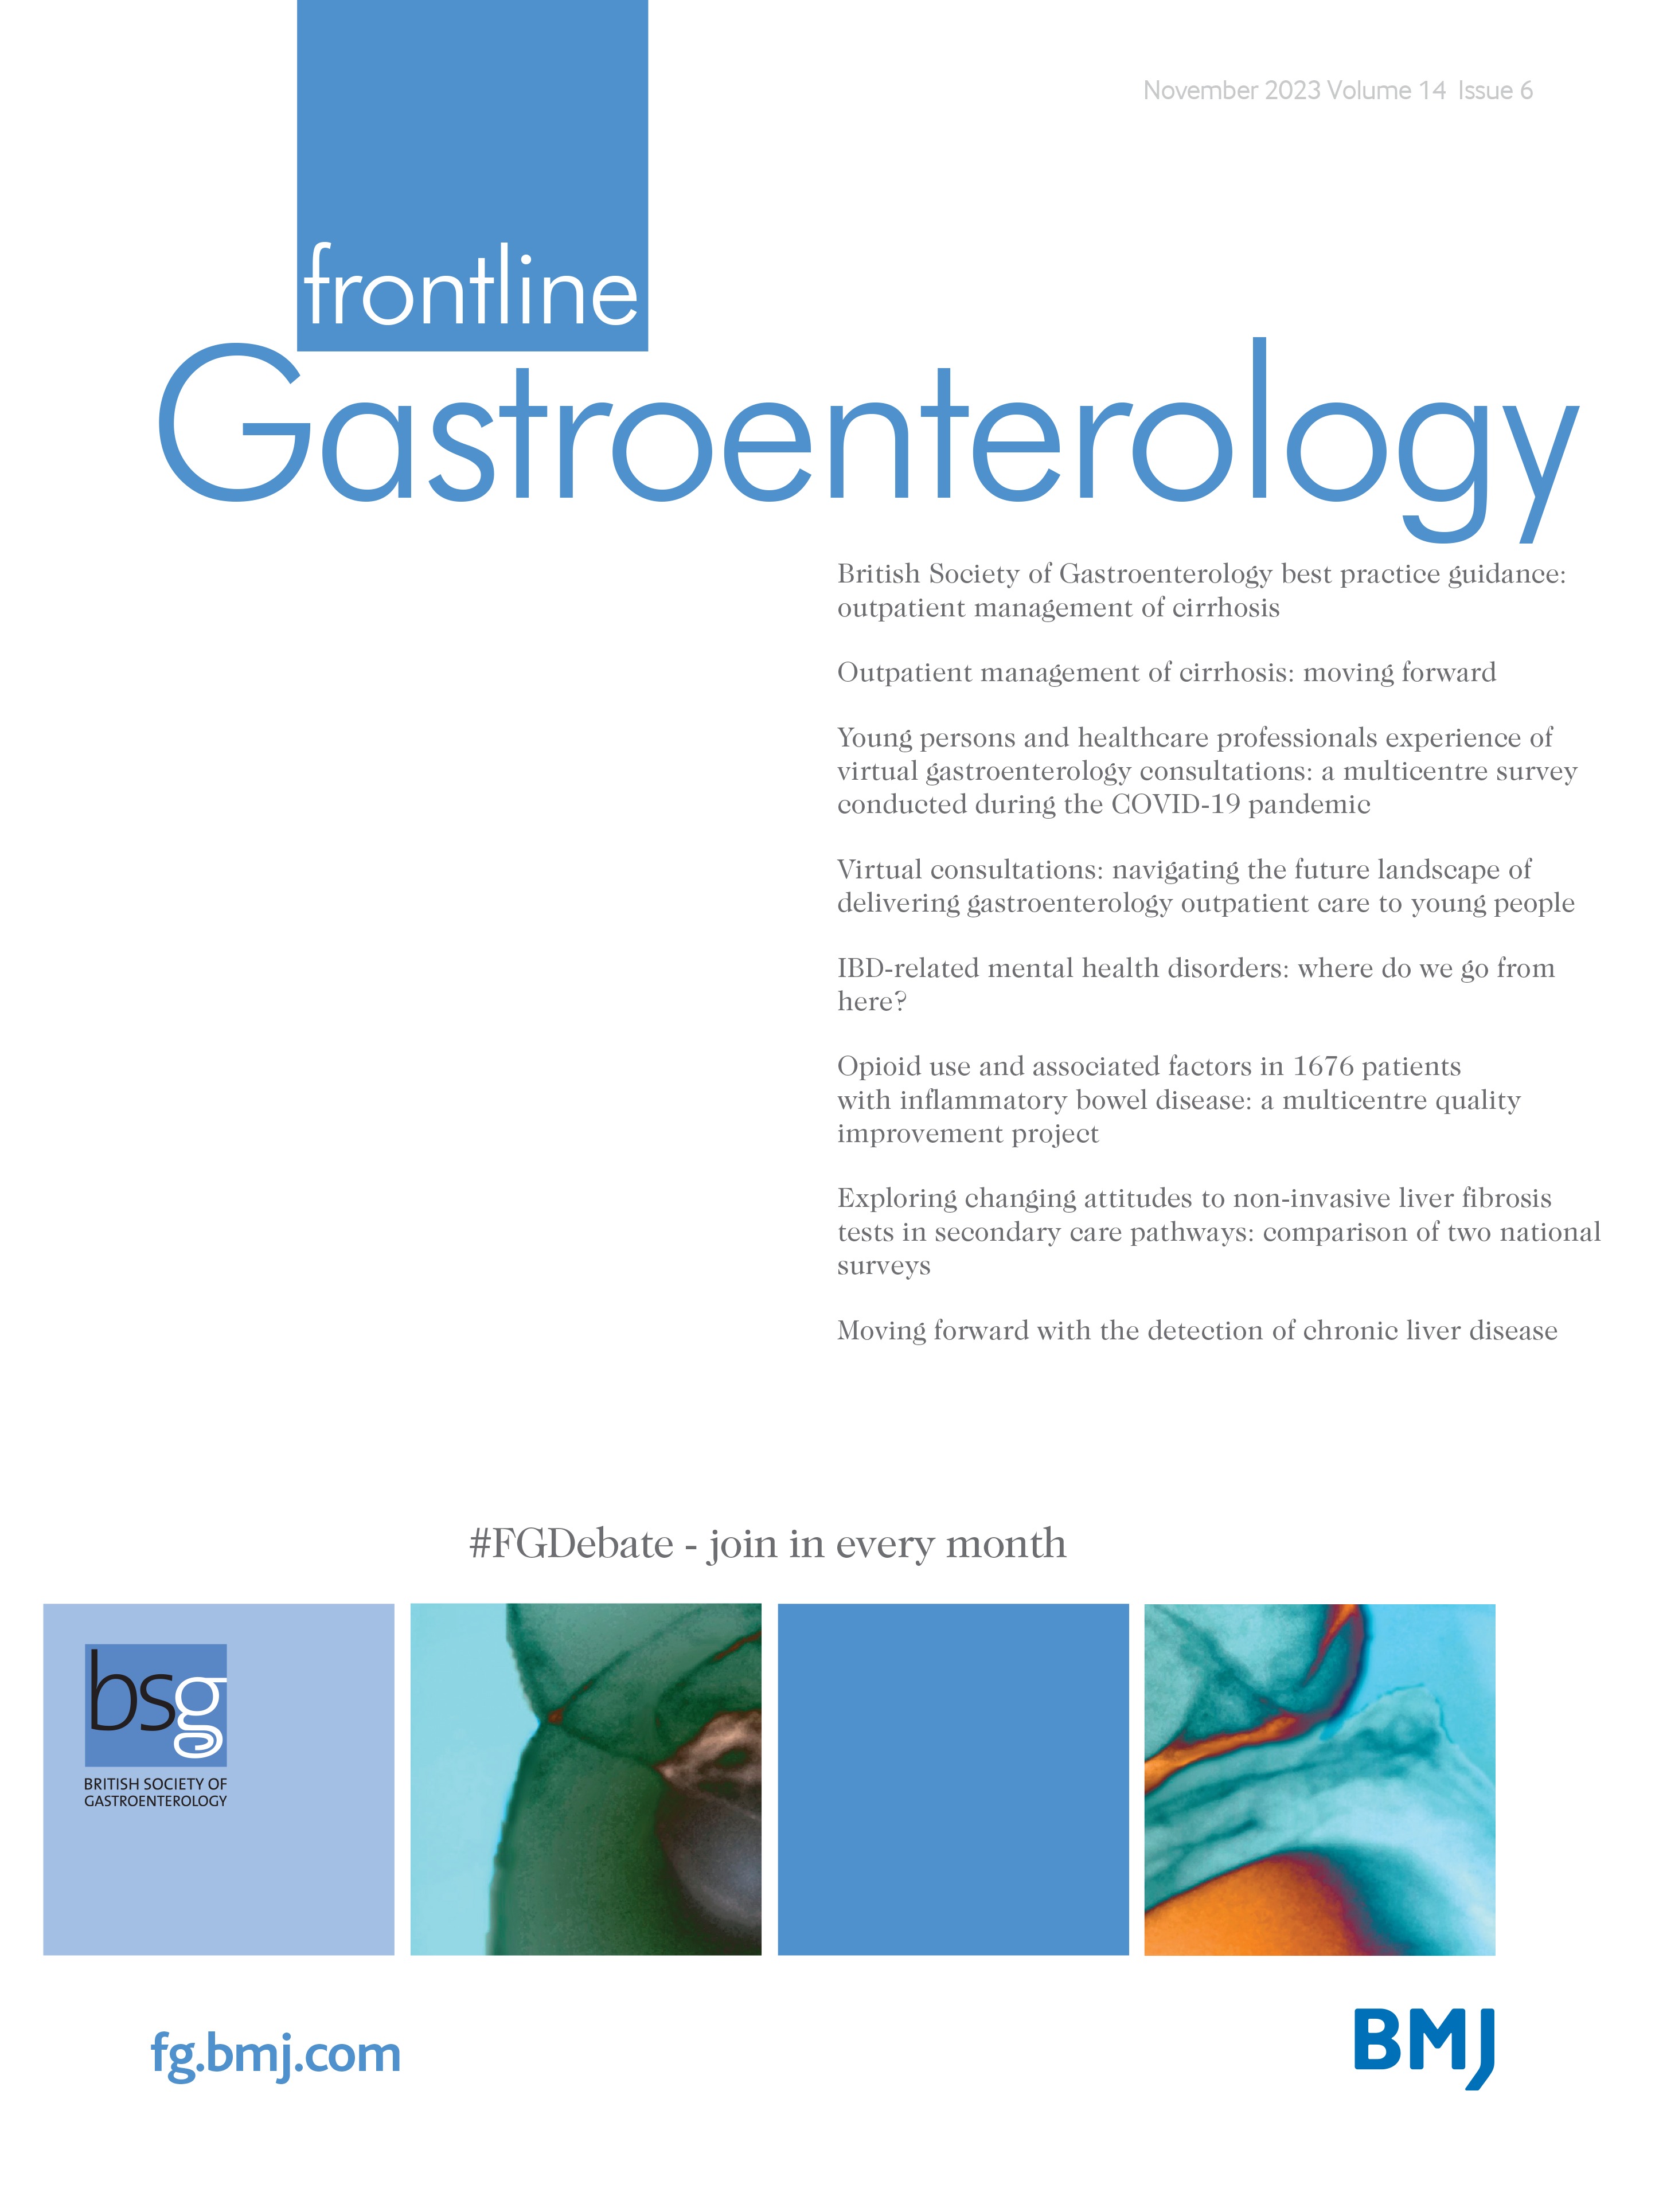 Emerging uses of glucagon-like peptide 1 (GLP-1) receptor agonists following ileal resection: literature review and case examples